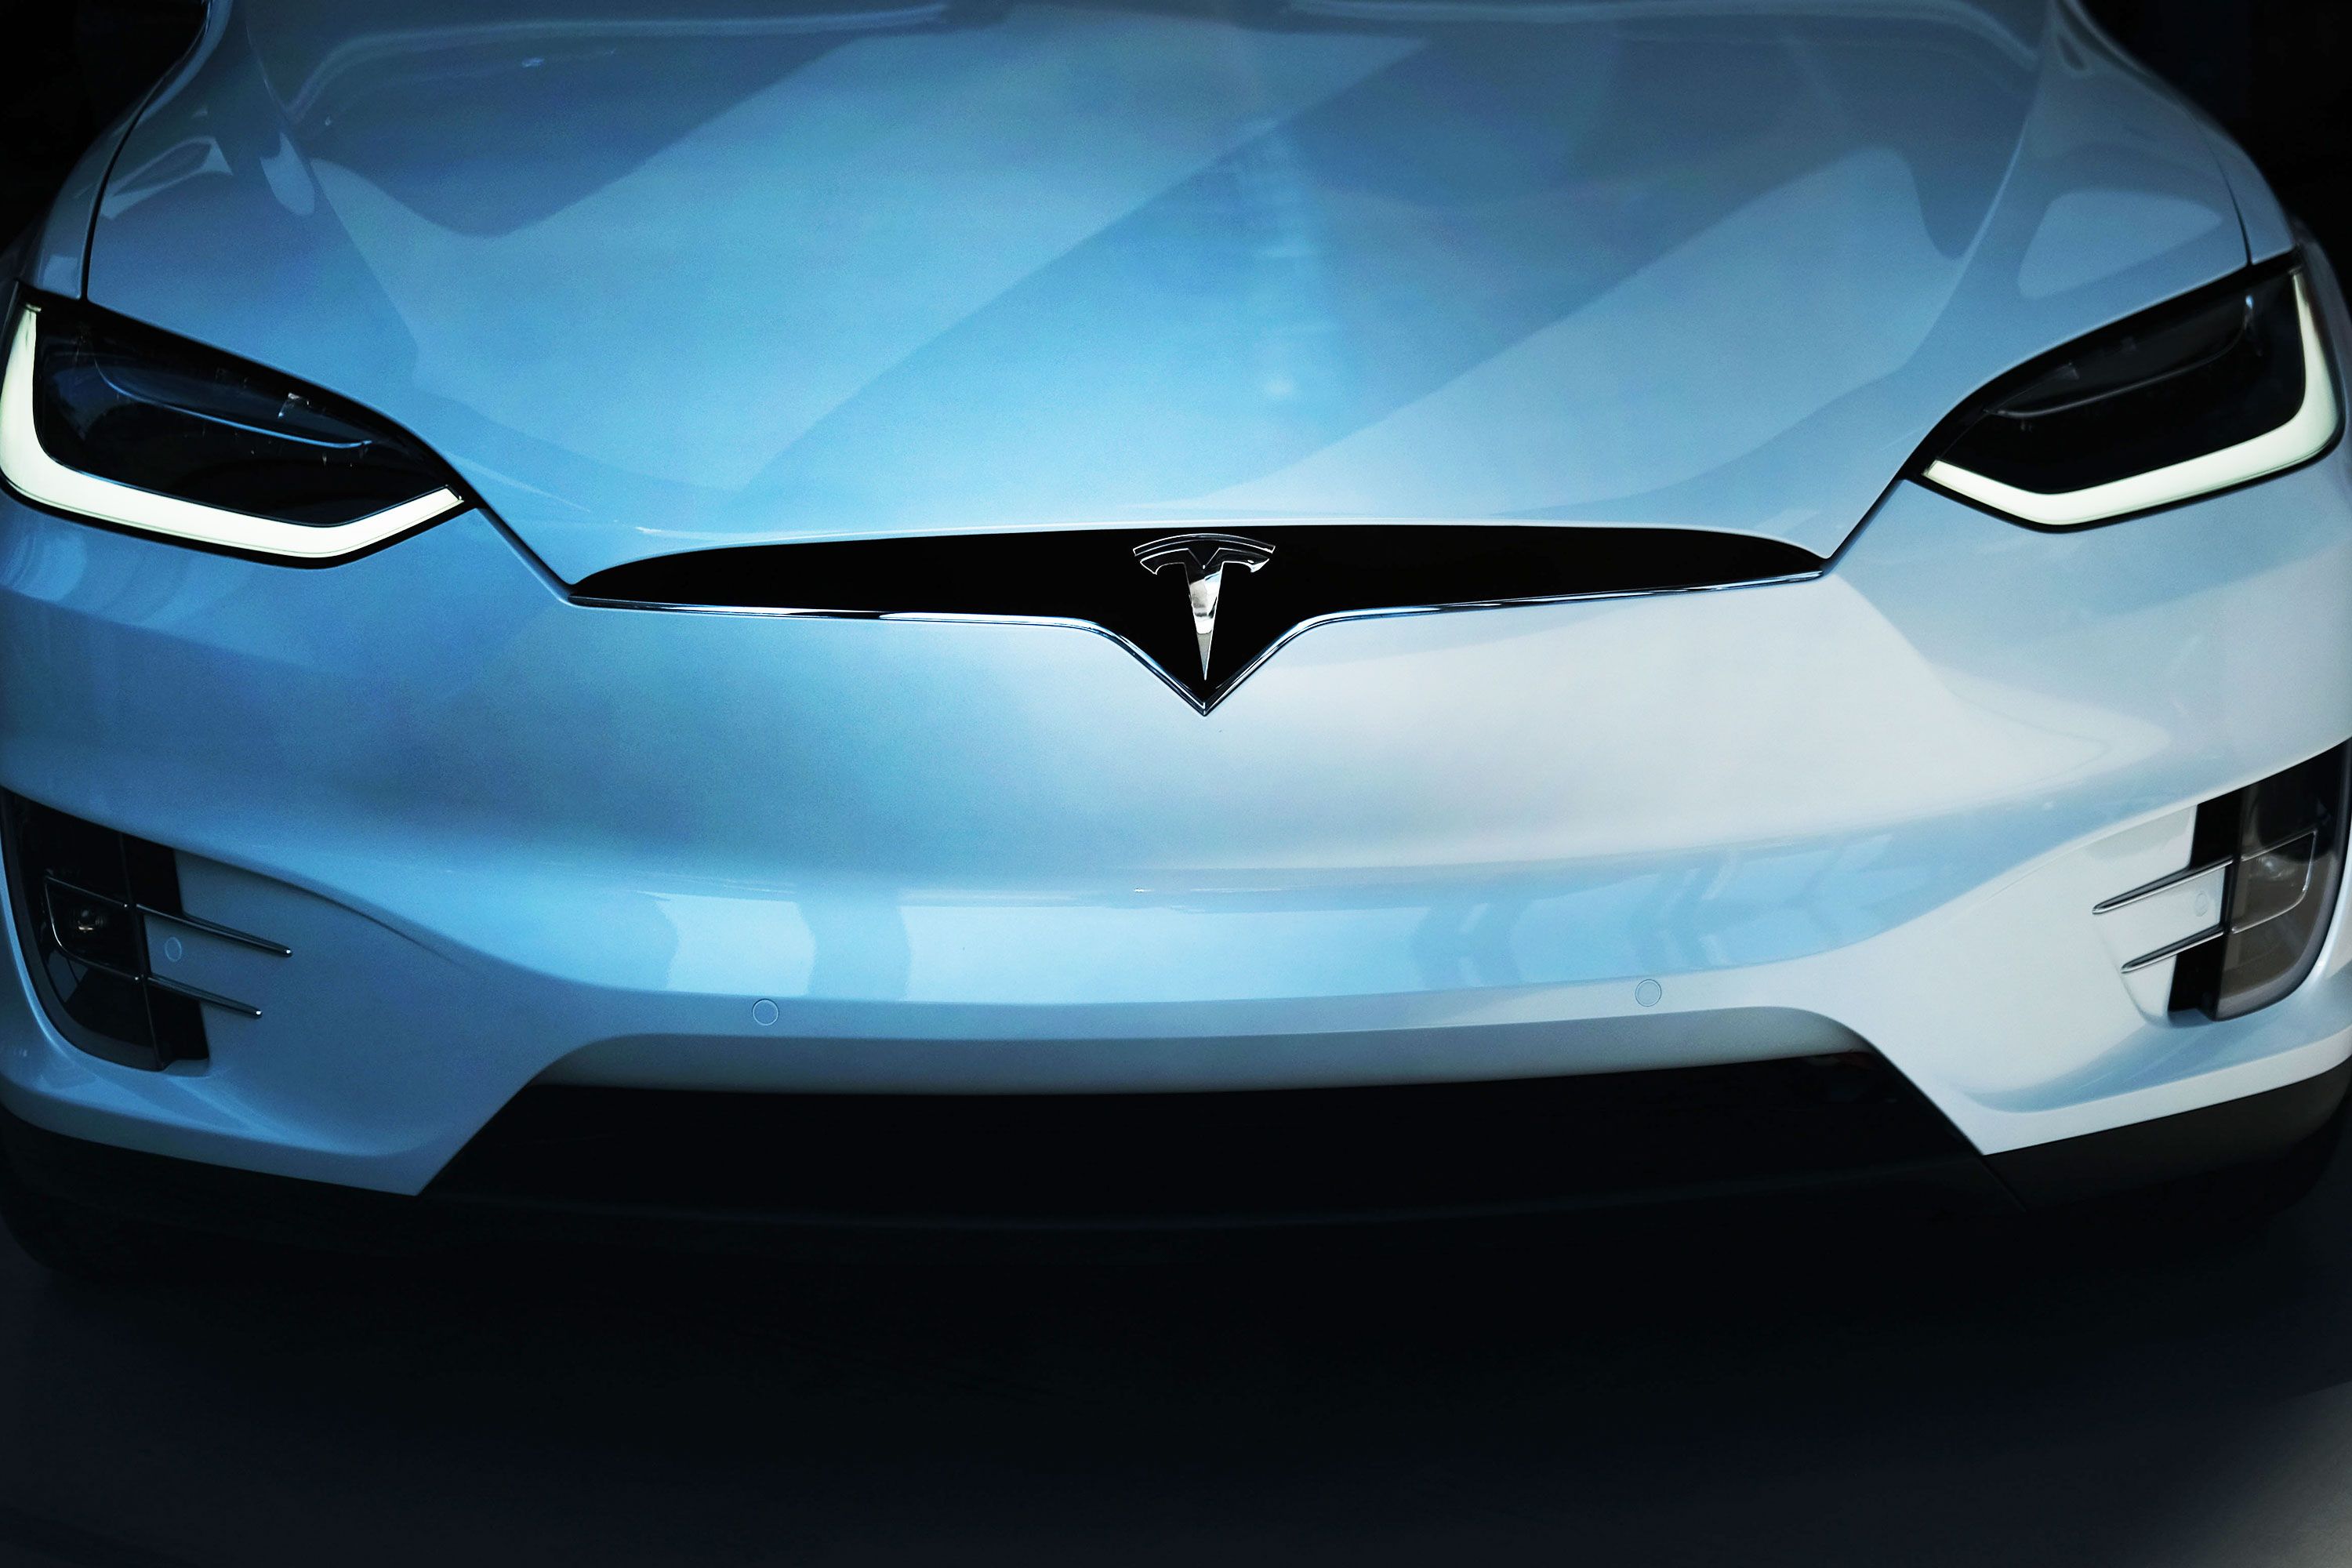 Tomorrow's News Today - Atlanta: [UPDATE] Tesla to Close Most of